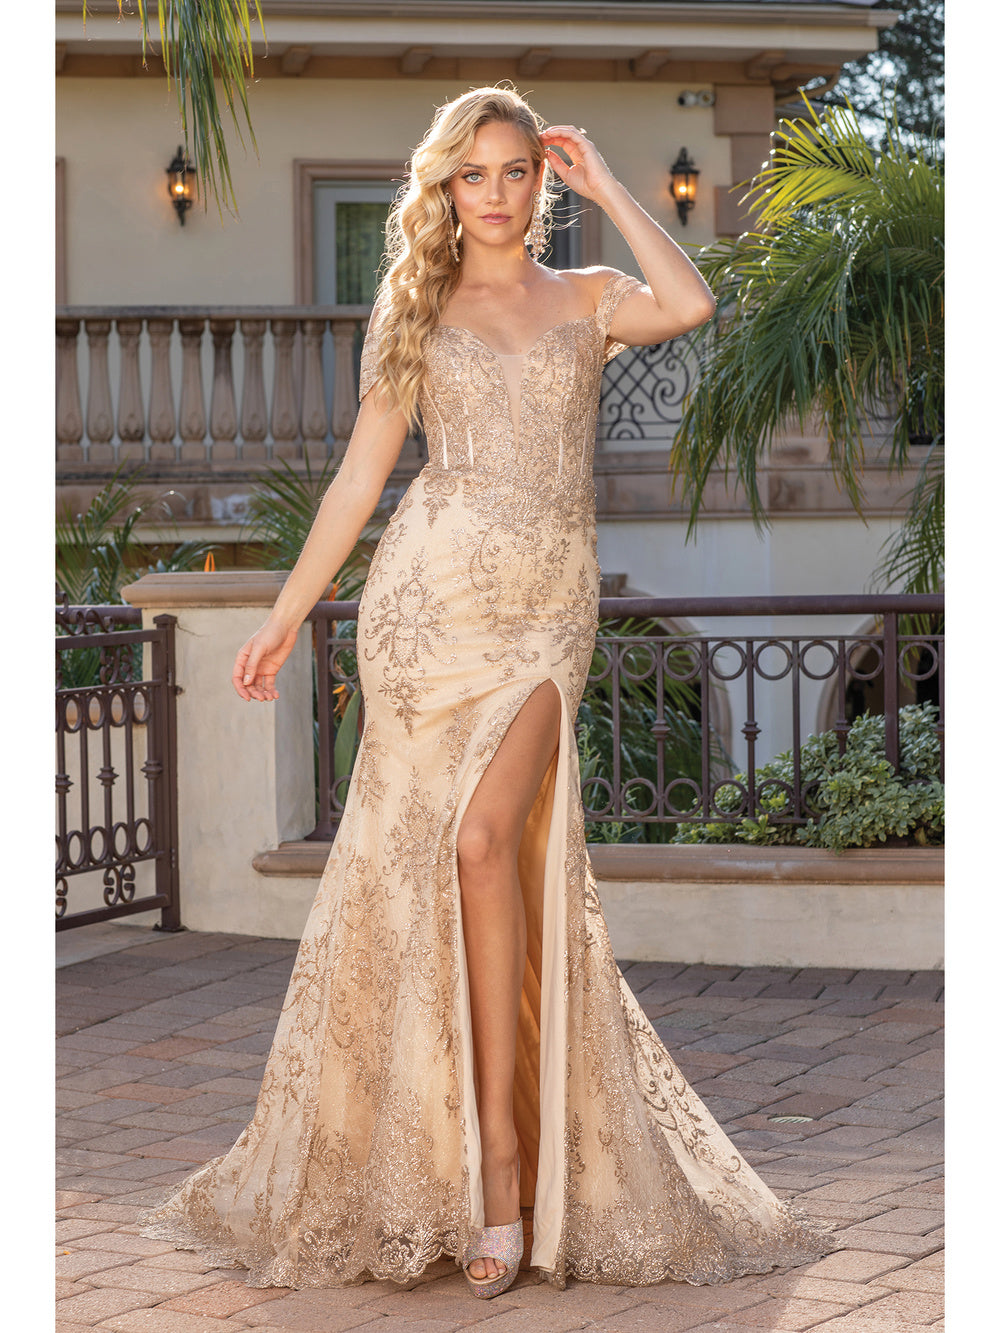 Gold Evening Dresses With Detachable Train Off-Shoulder Party Cocktail Prom  Gown | eBay